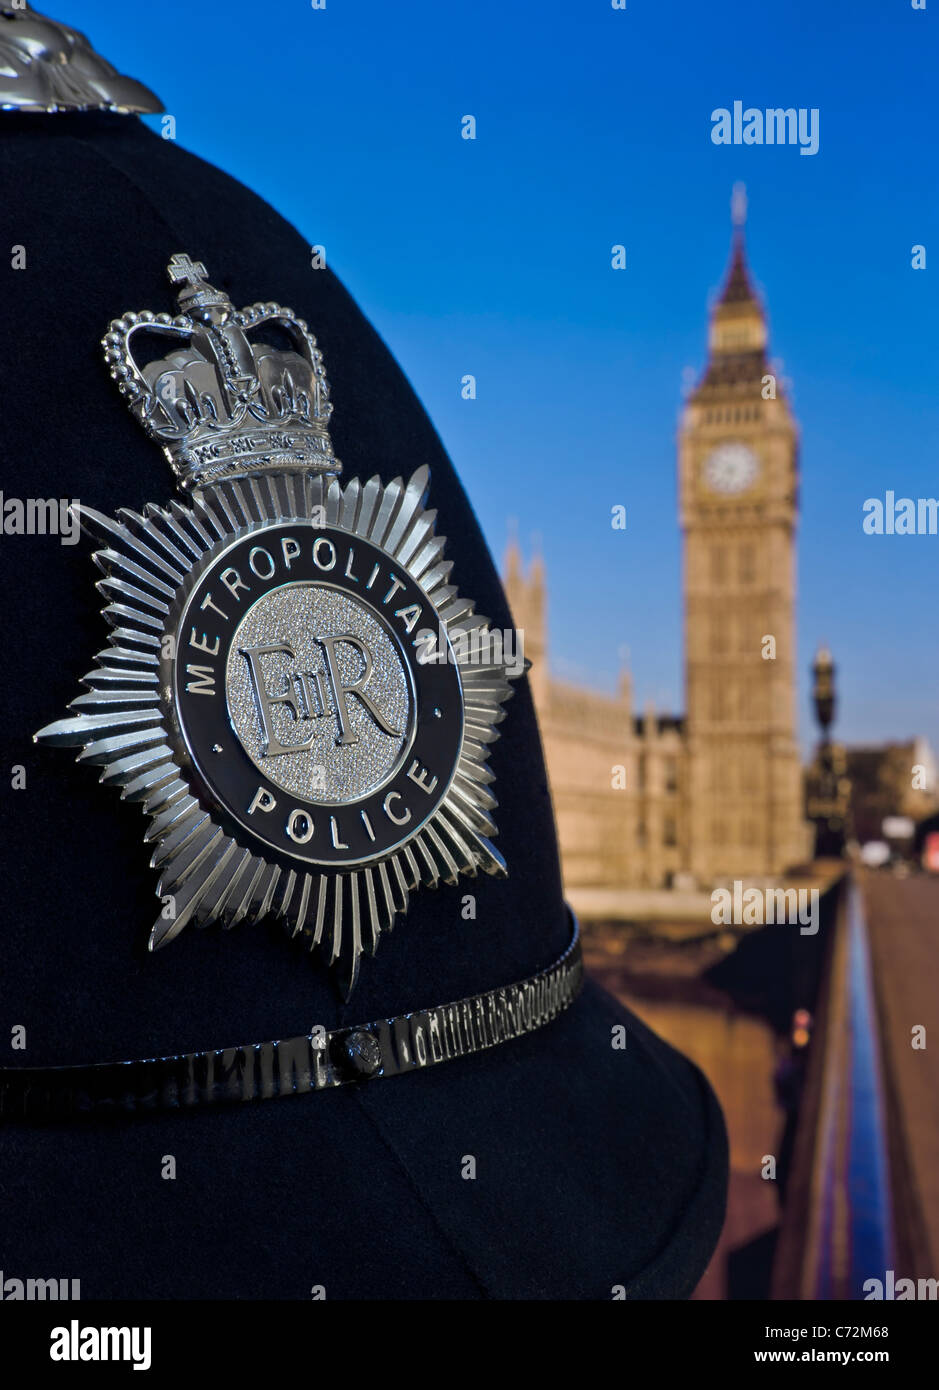 Metropolitan police constable helmet and badge with Houses of Parliament & River Thames Westminster behind Law Politics Recruitment Concept London UK Stock Photo